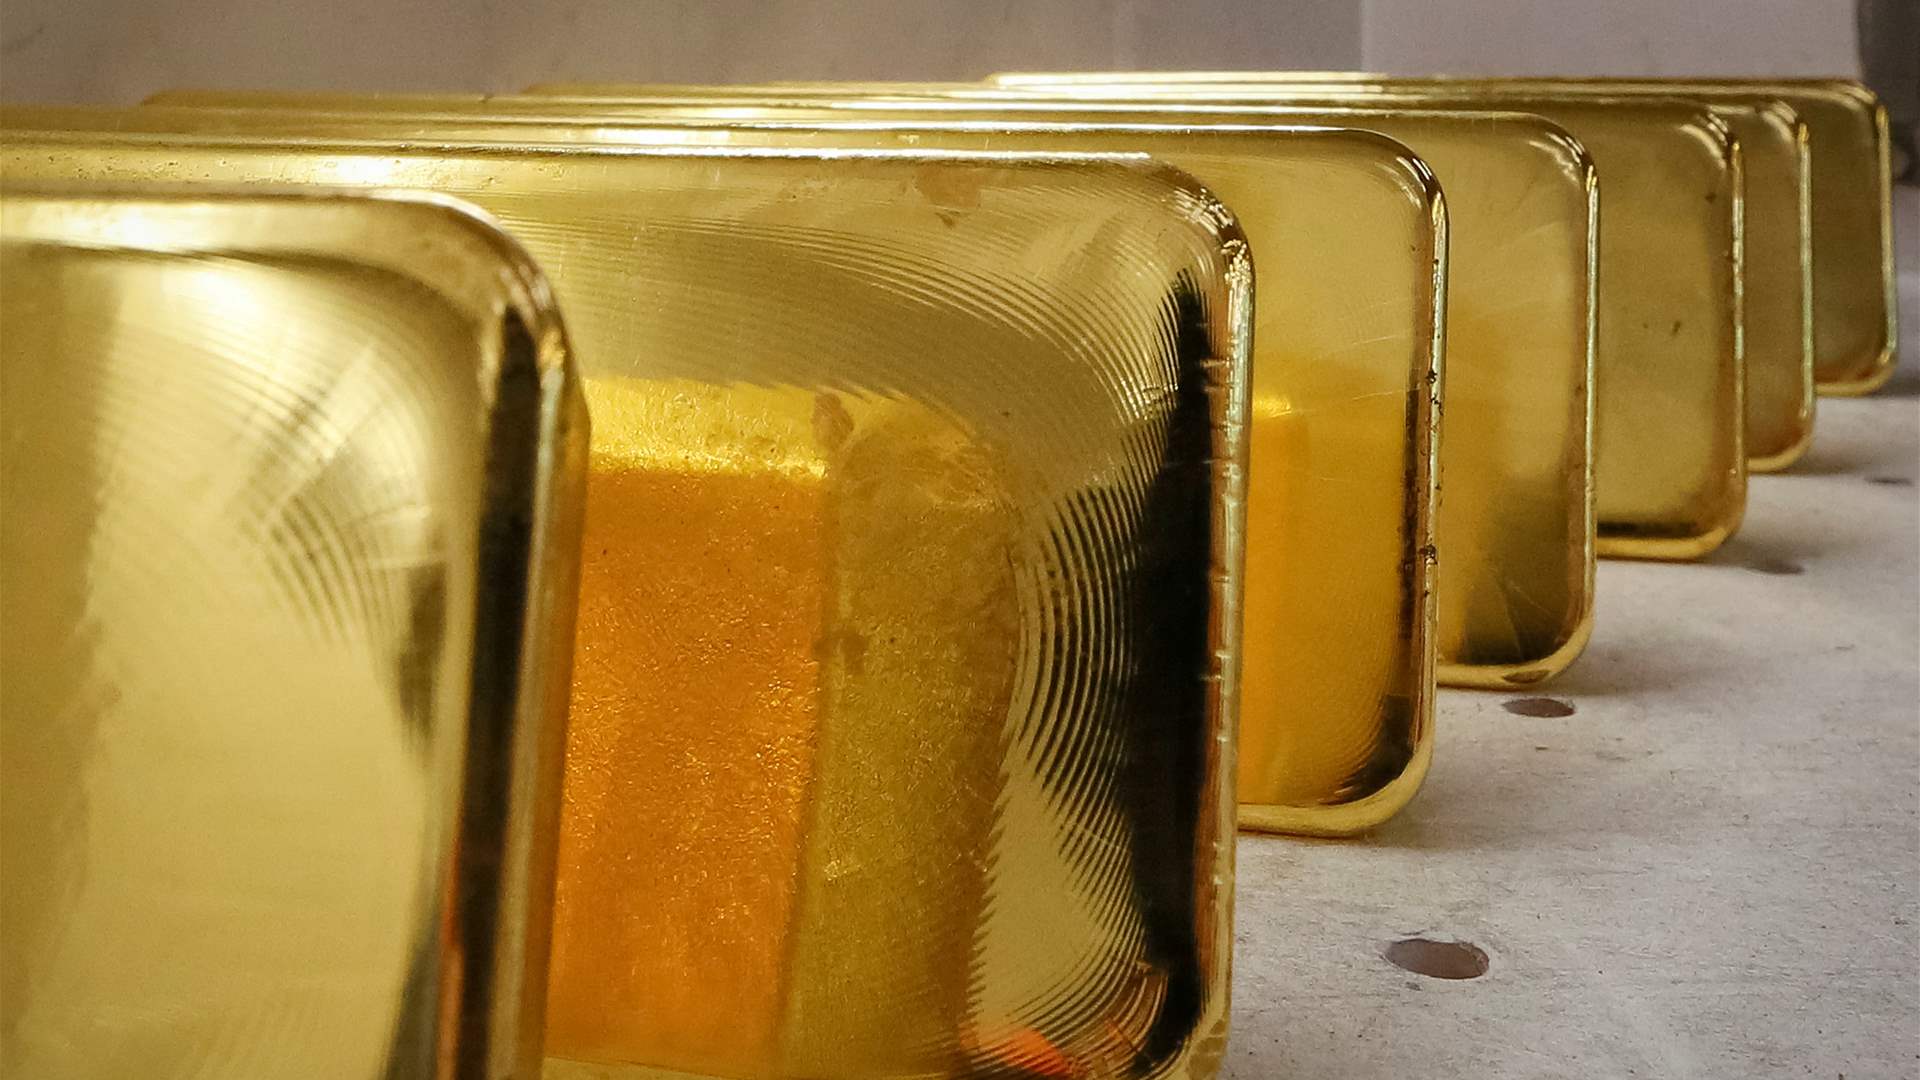 BDL confirms gold reserves align with official statements